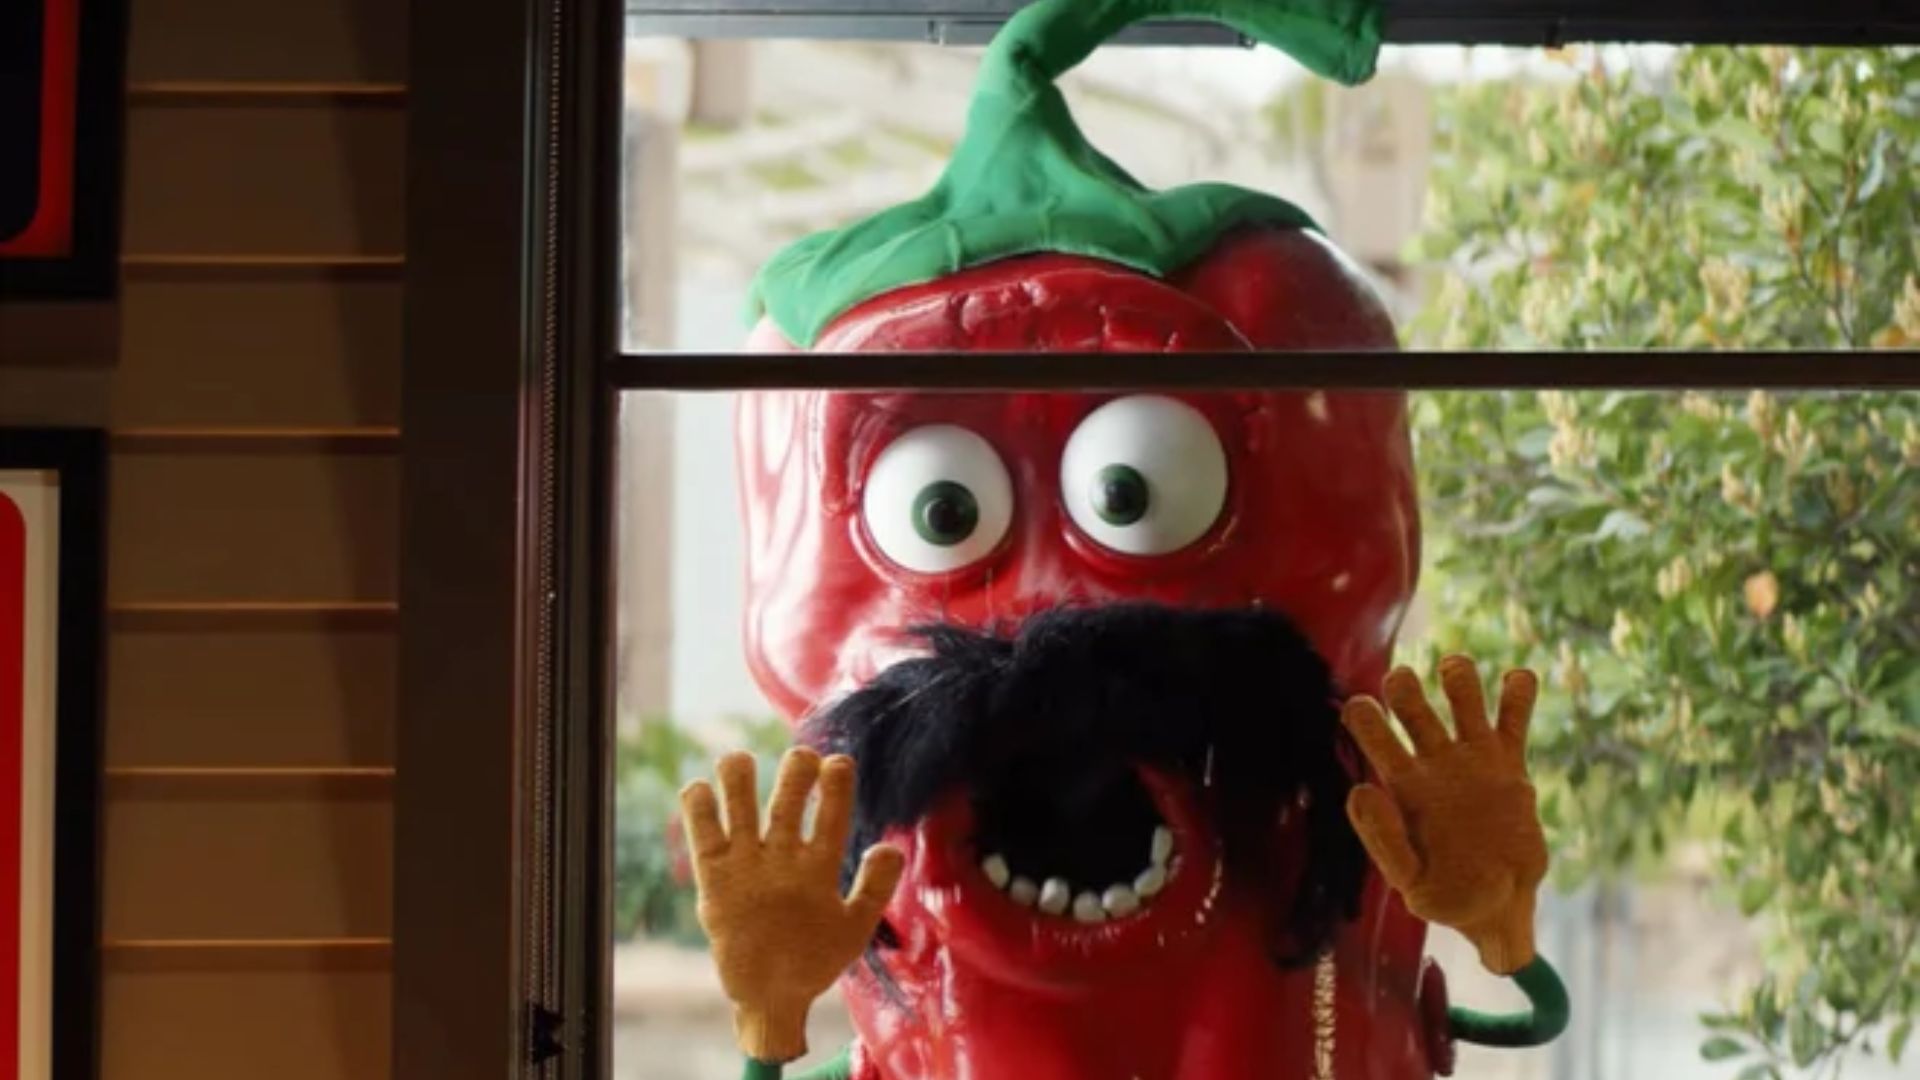 Chili’s calls out the big mac and other fast food meals in its latest value play